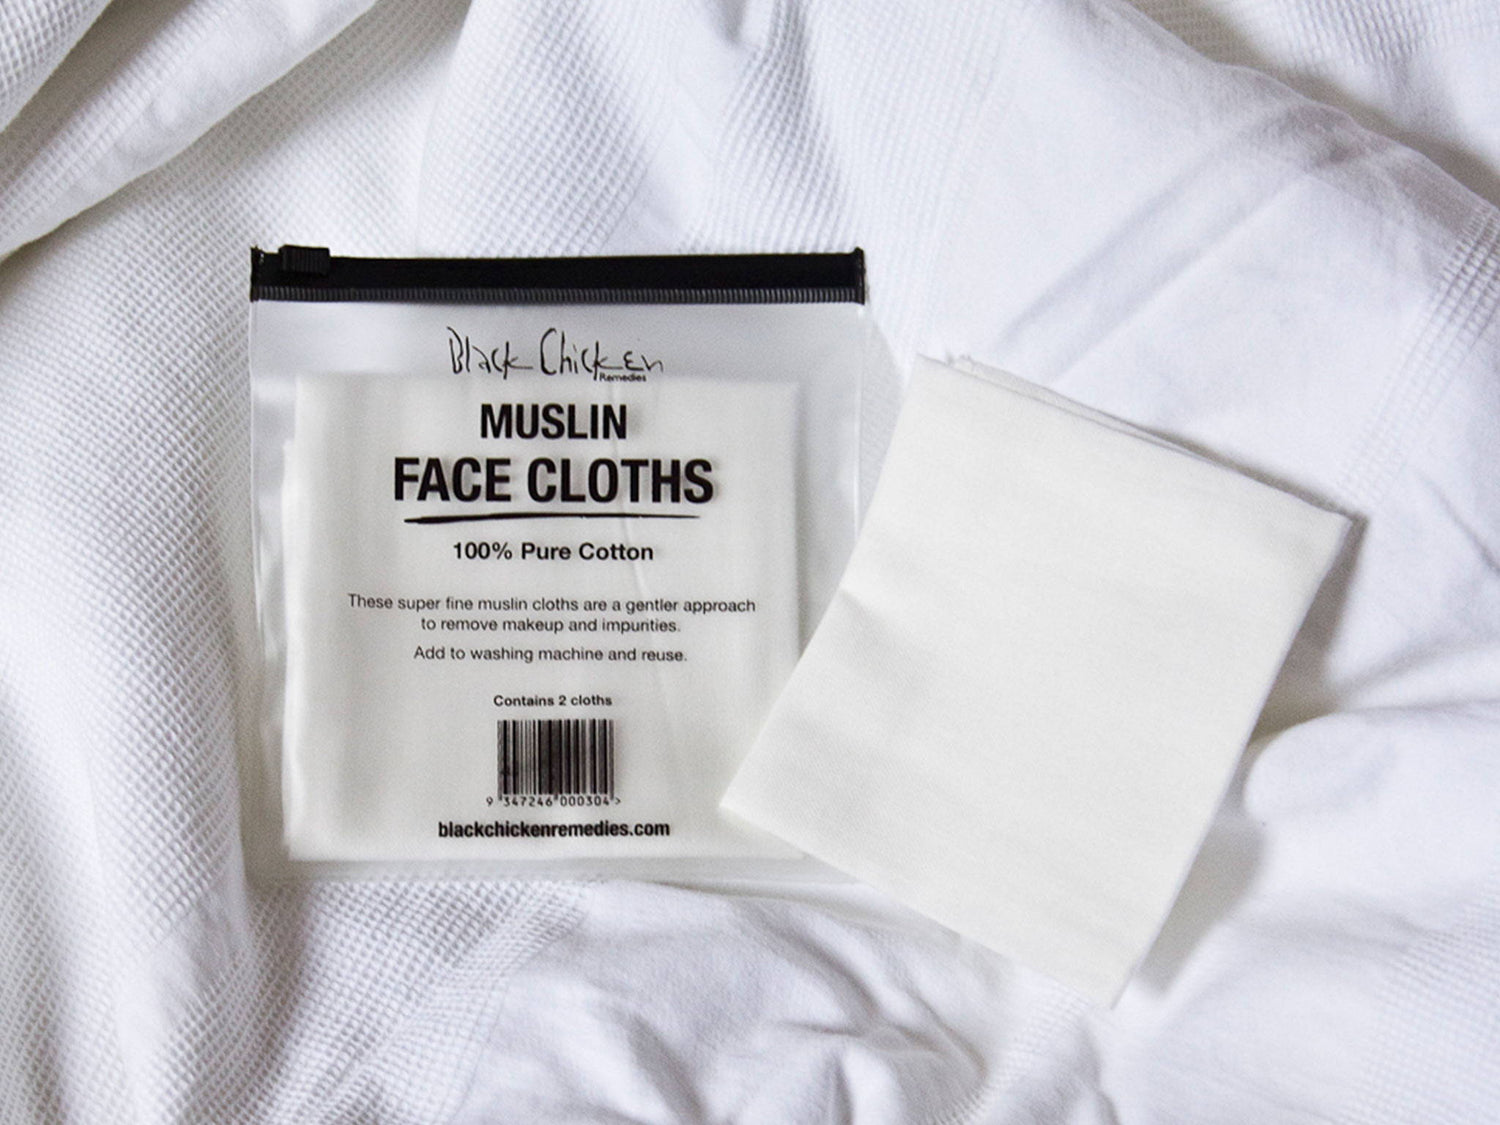 The benefits of using a muslin cloth